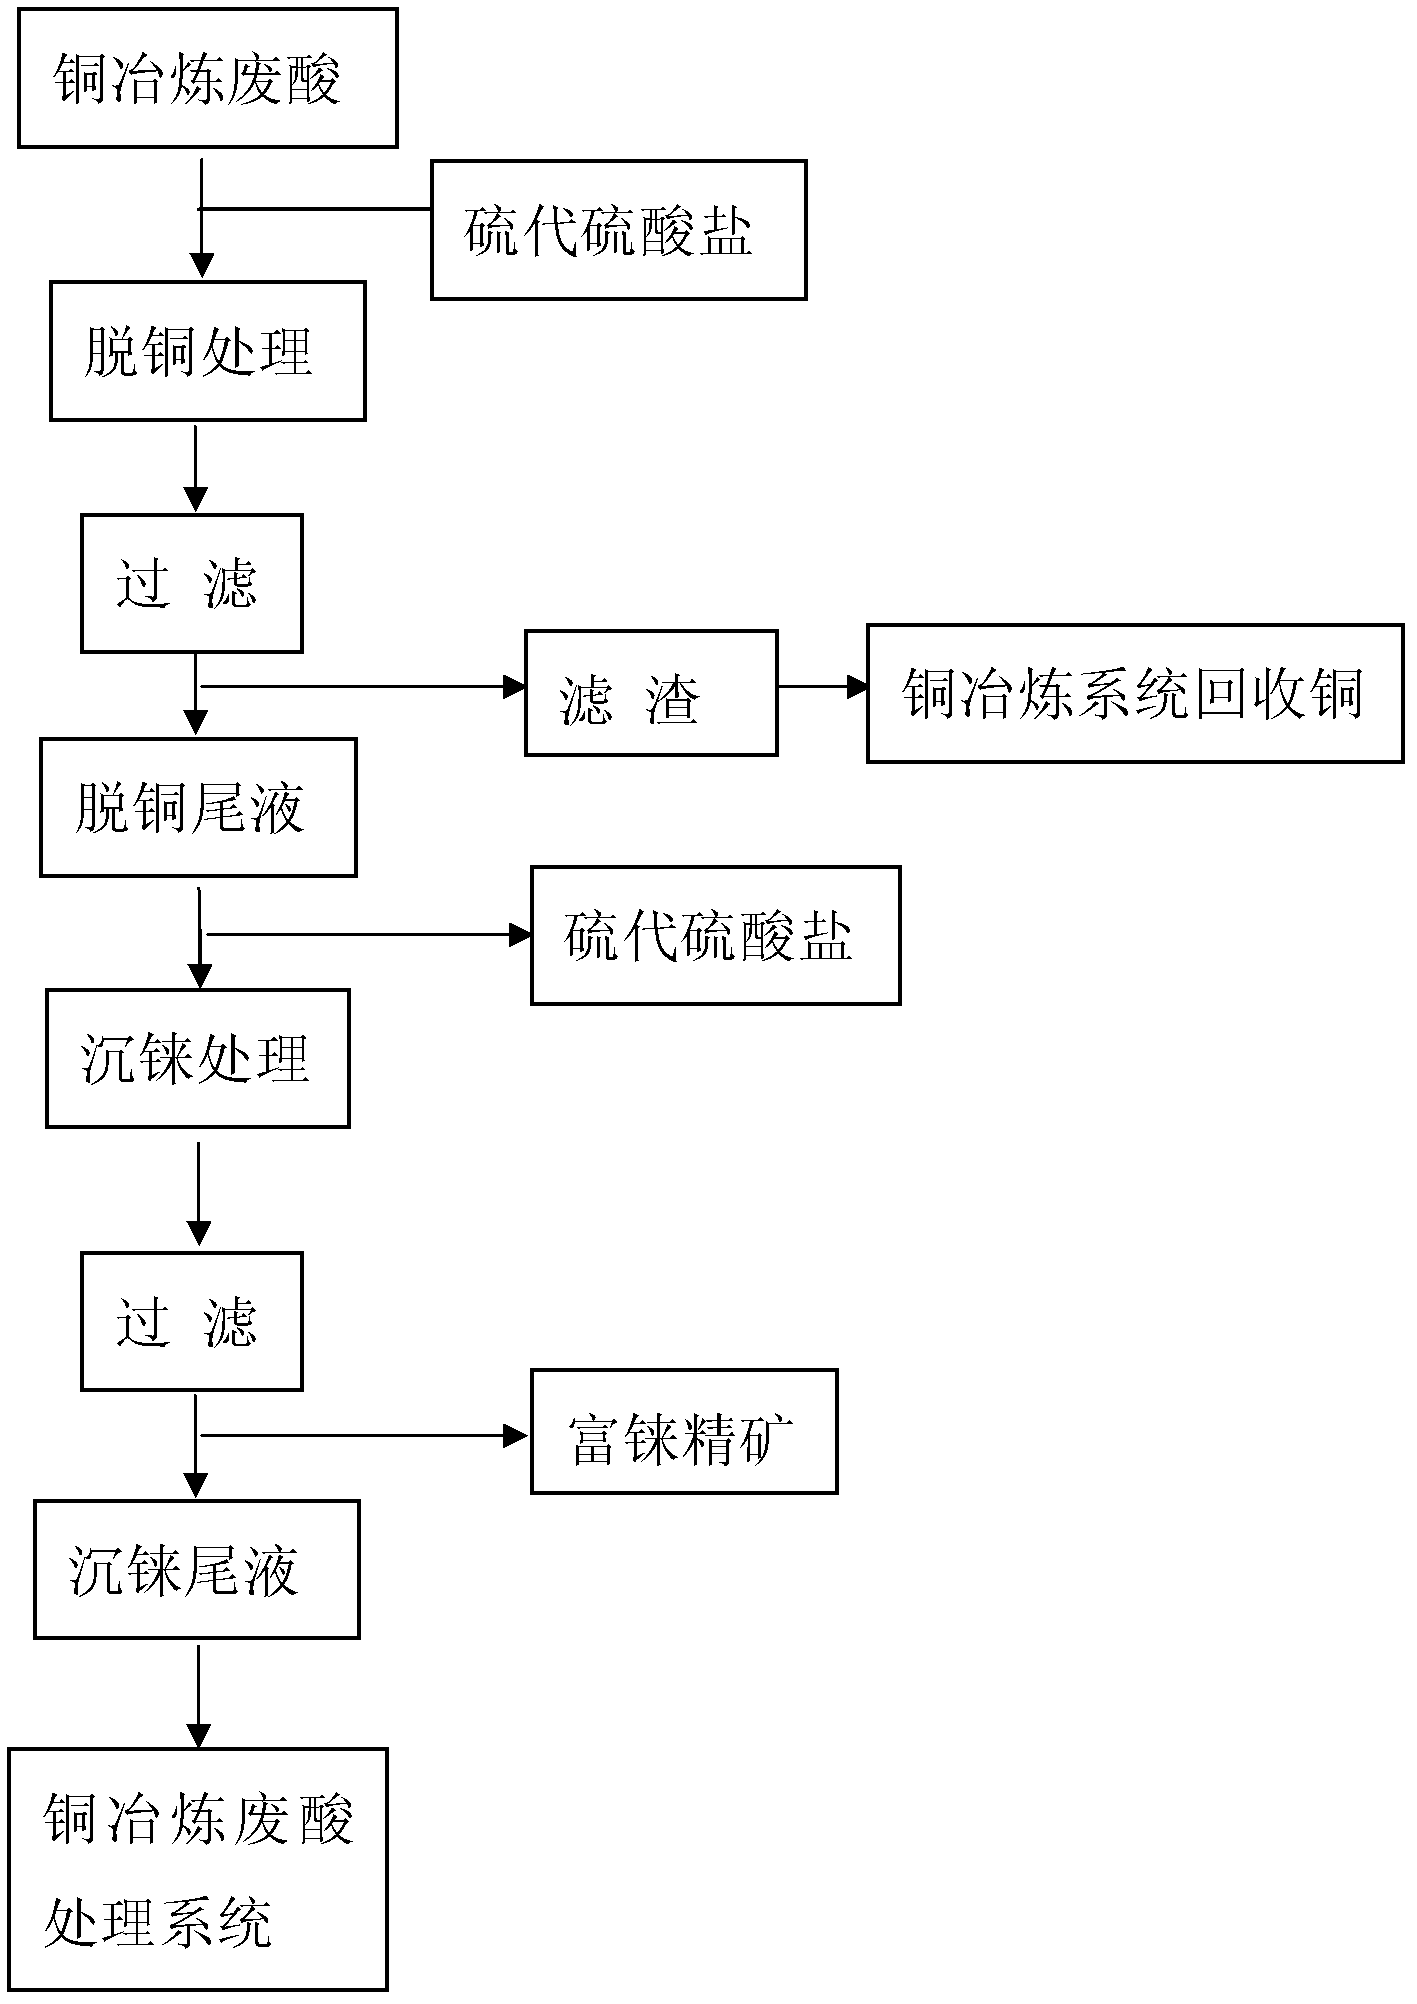 Method for recycling rhenium from copper smelting waste acid